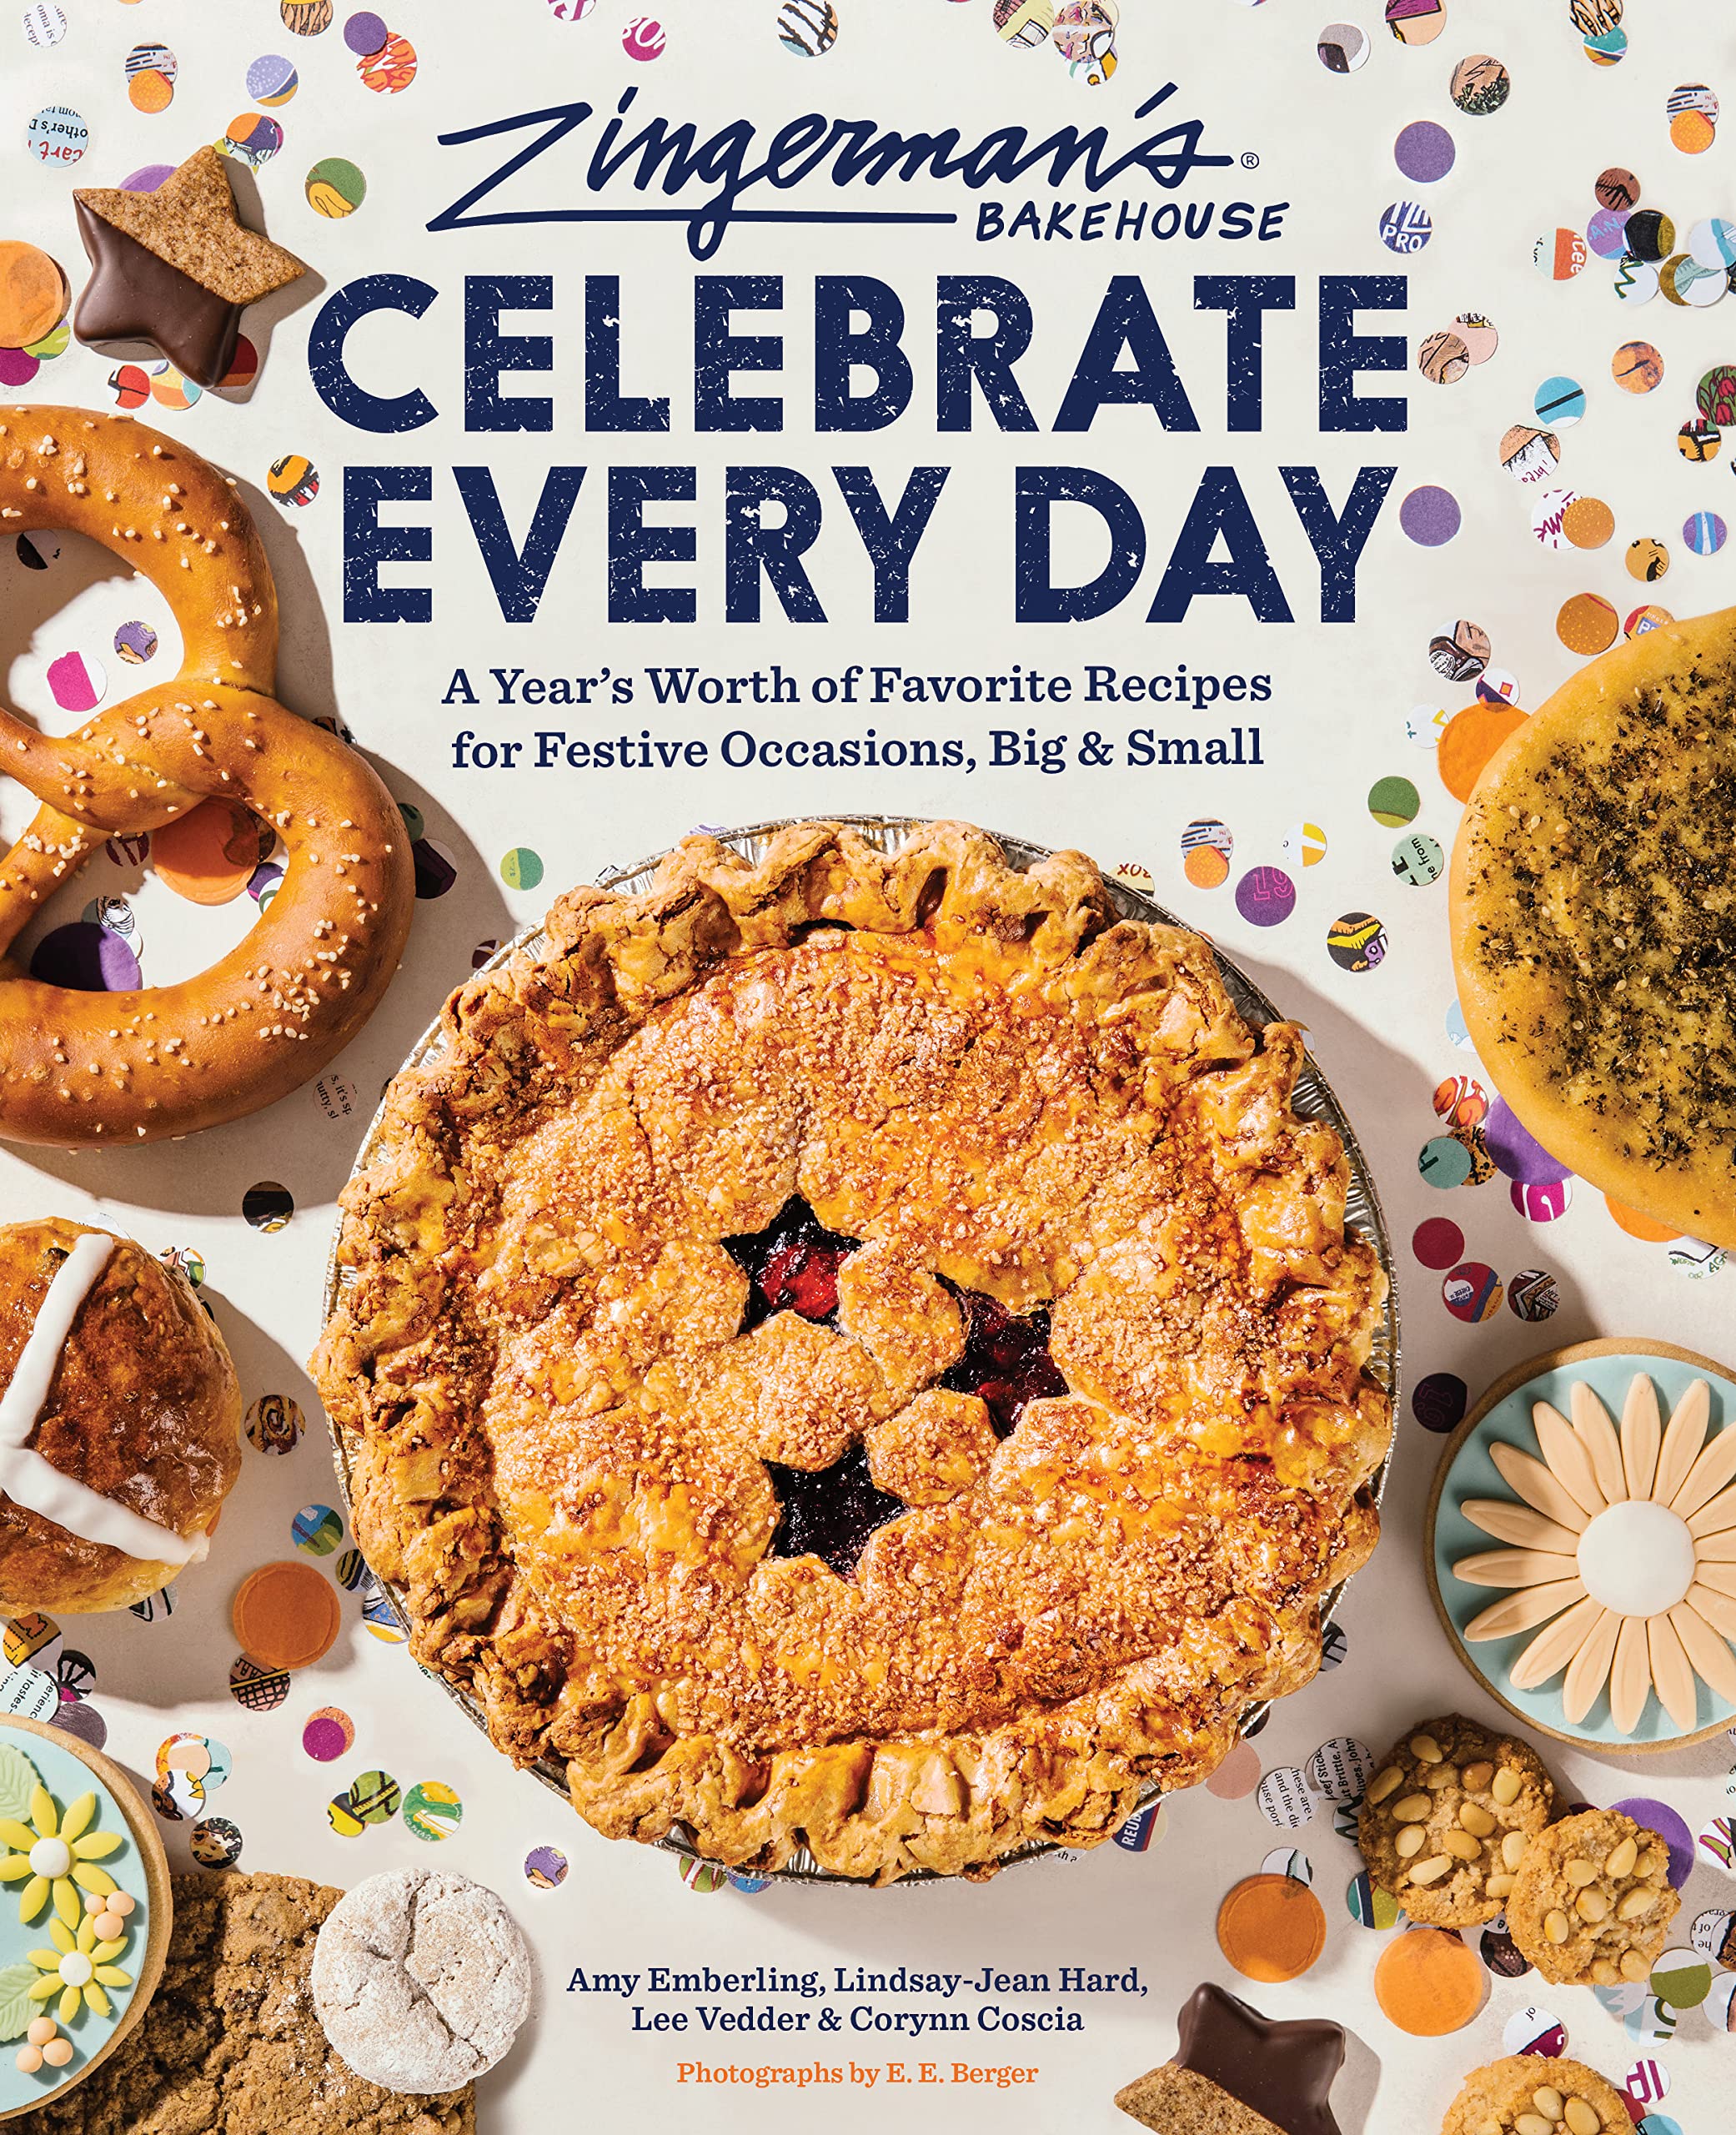 Zingerman's Bakehouse Celebrate Every Day: A Year's Worth of Favorite Recipes for Festive Occasions, Big and Small (Amy Emberling, Lindsay-Jean Hard, et al.) *Signed*